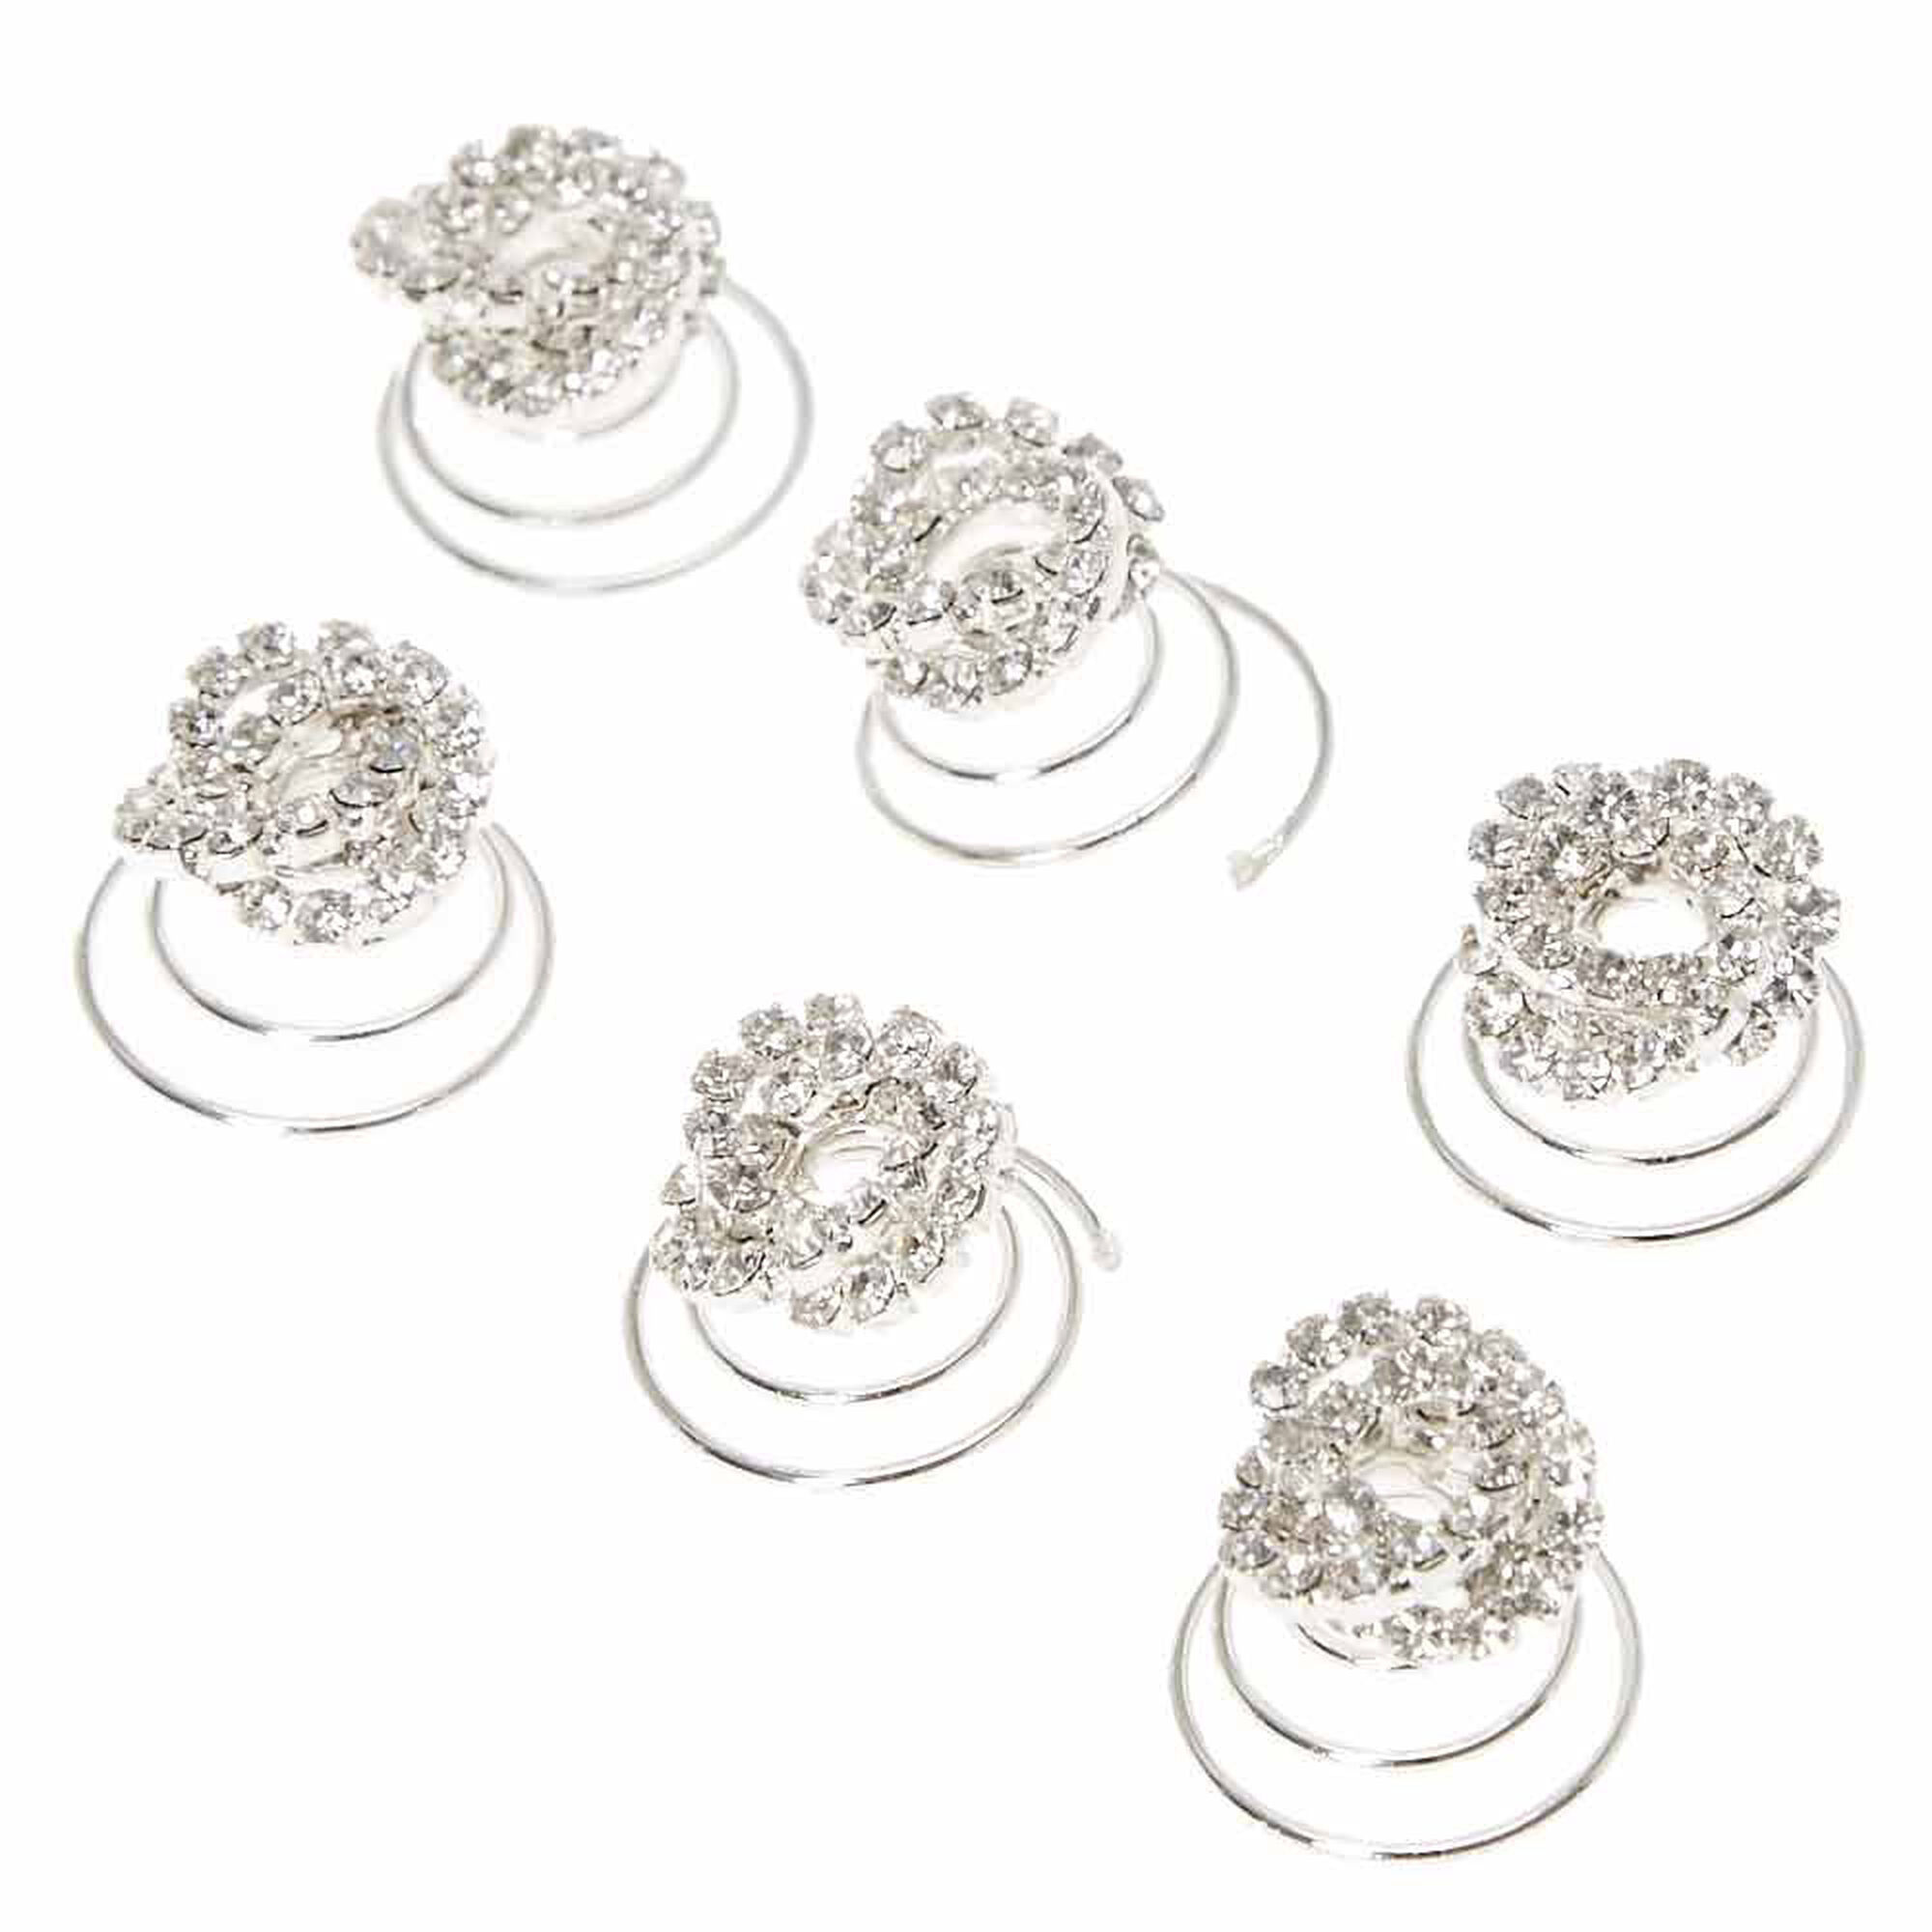 View Claires Twisted Glass Rhinestone Hair Spinners 6 Pack Silver information